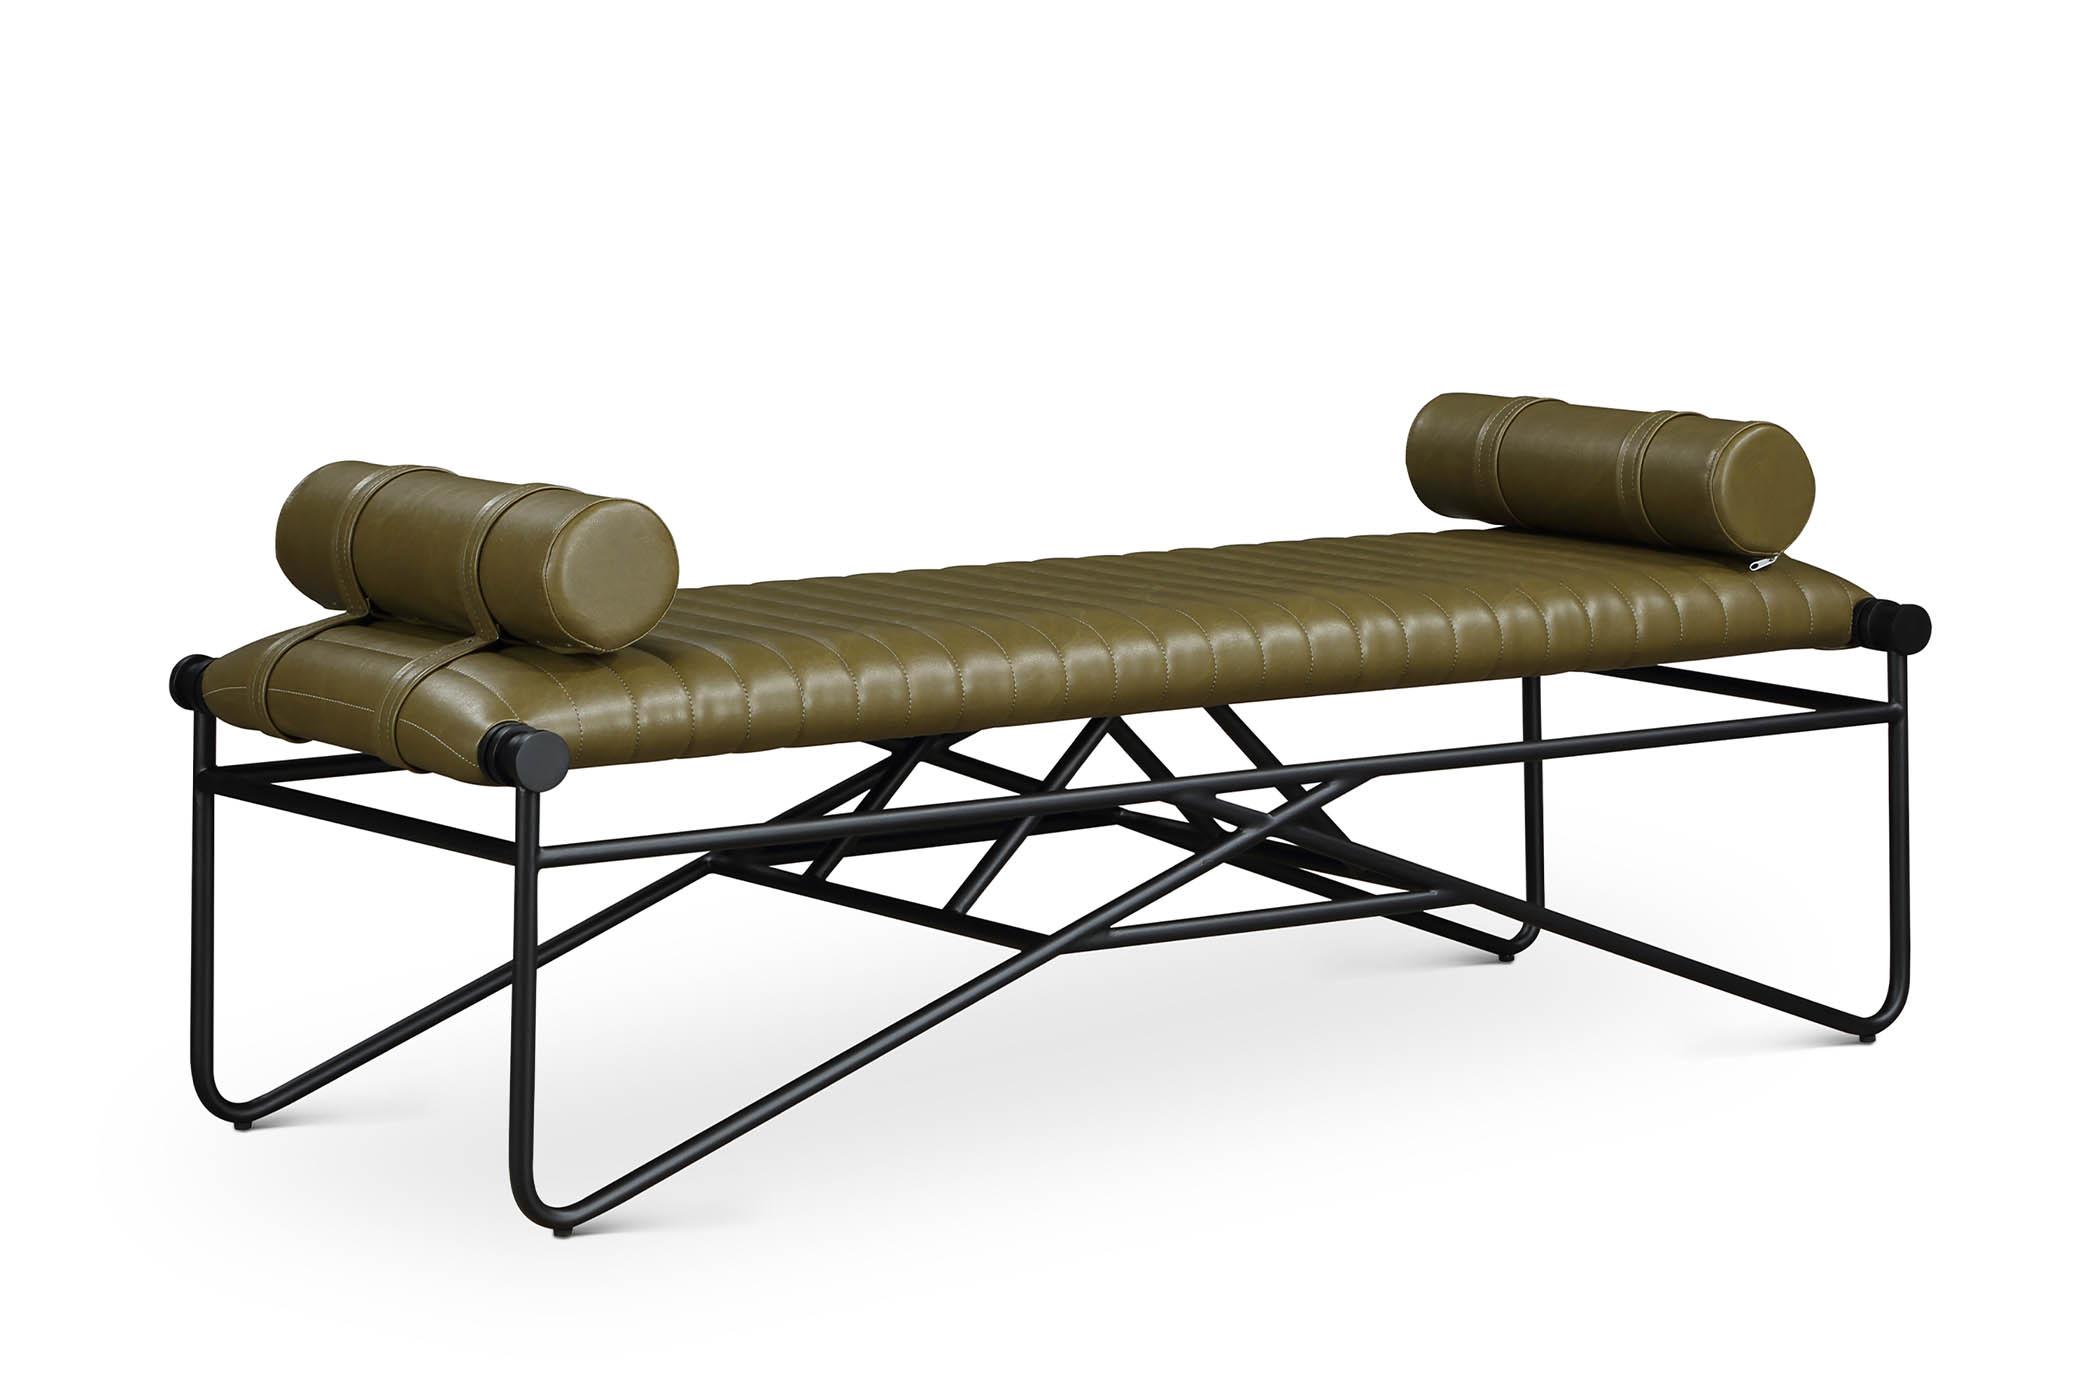 

    
Olive Vegan Leather Bench GATSBY 22052Olive Meridian Modern Contemporary
